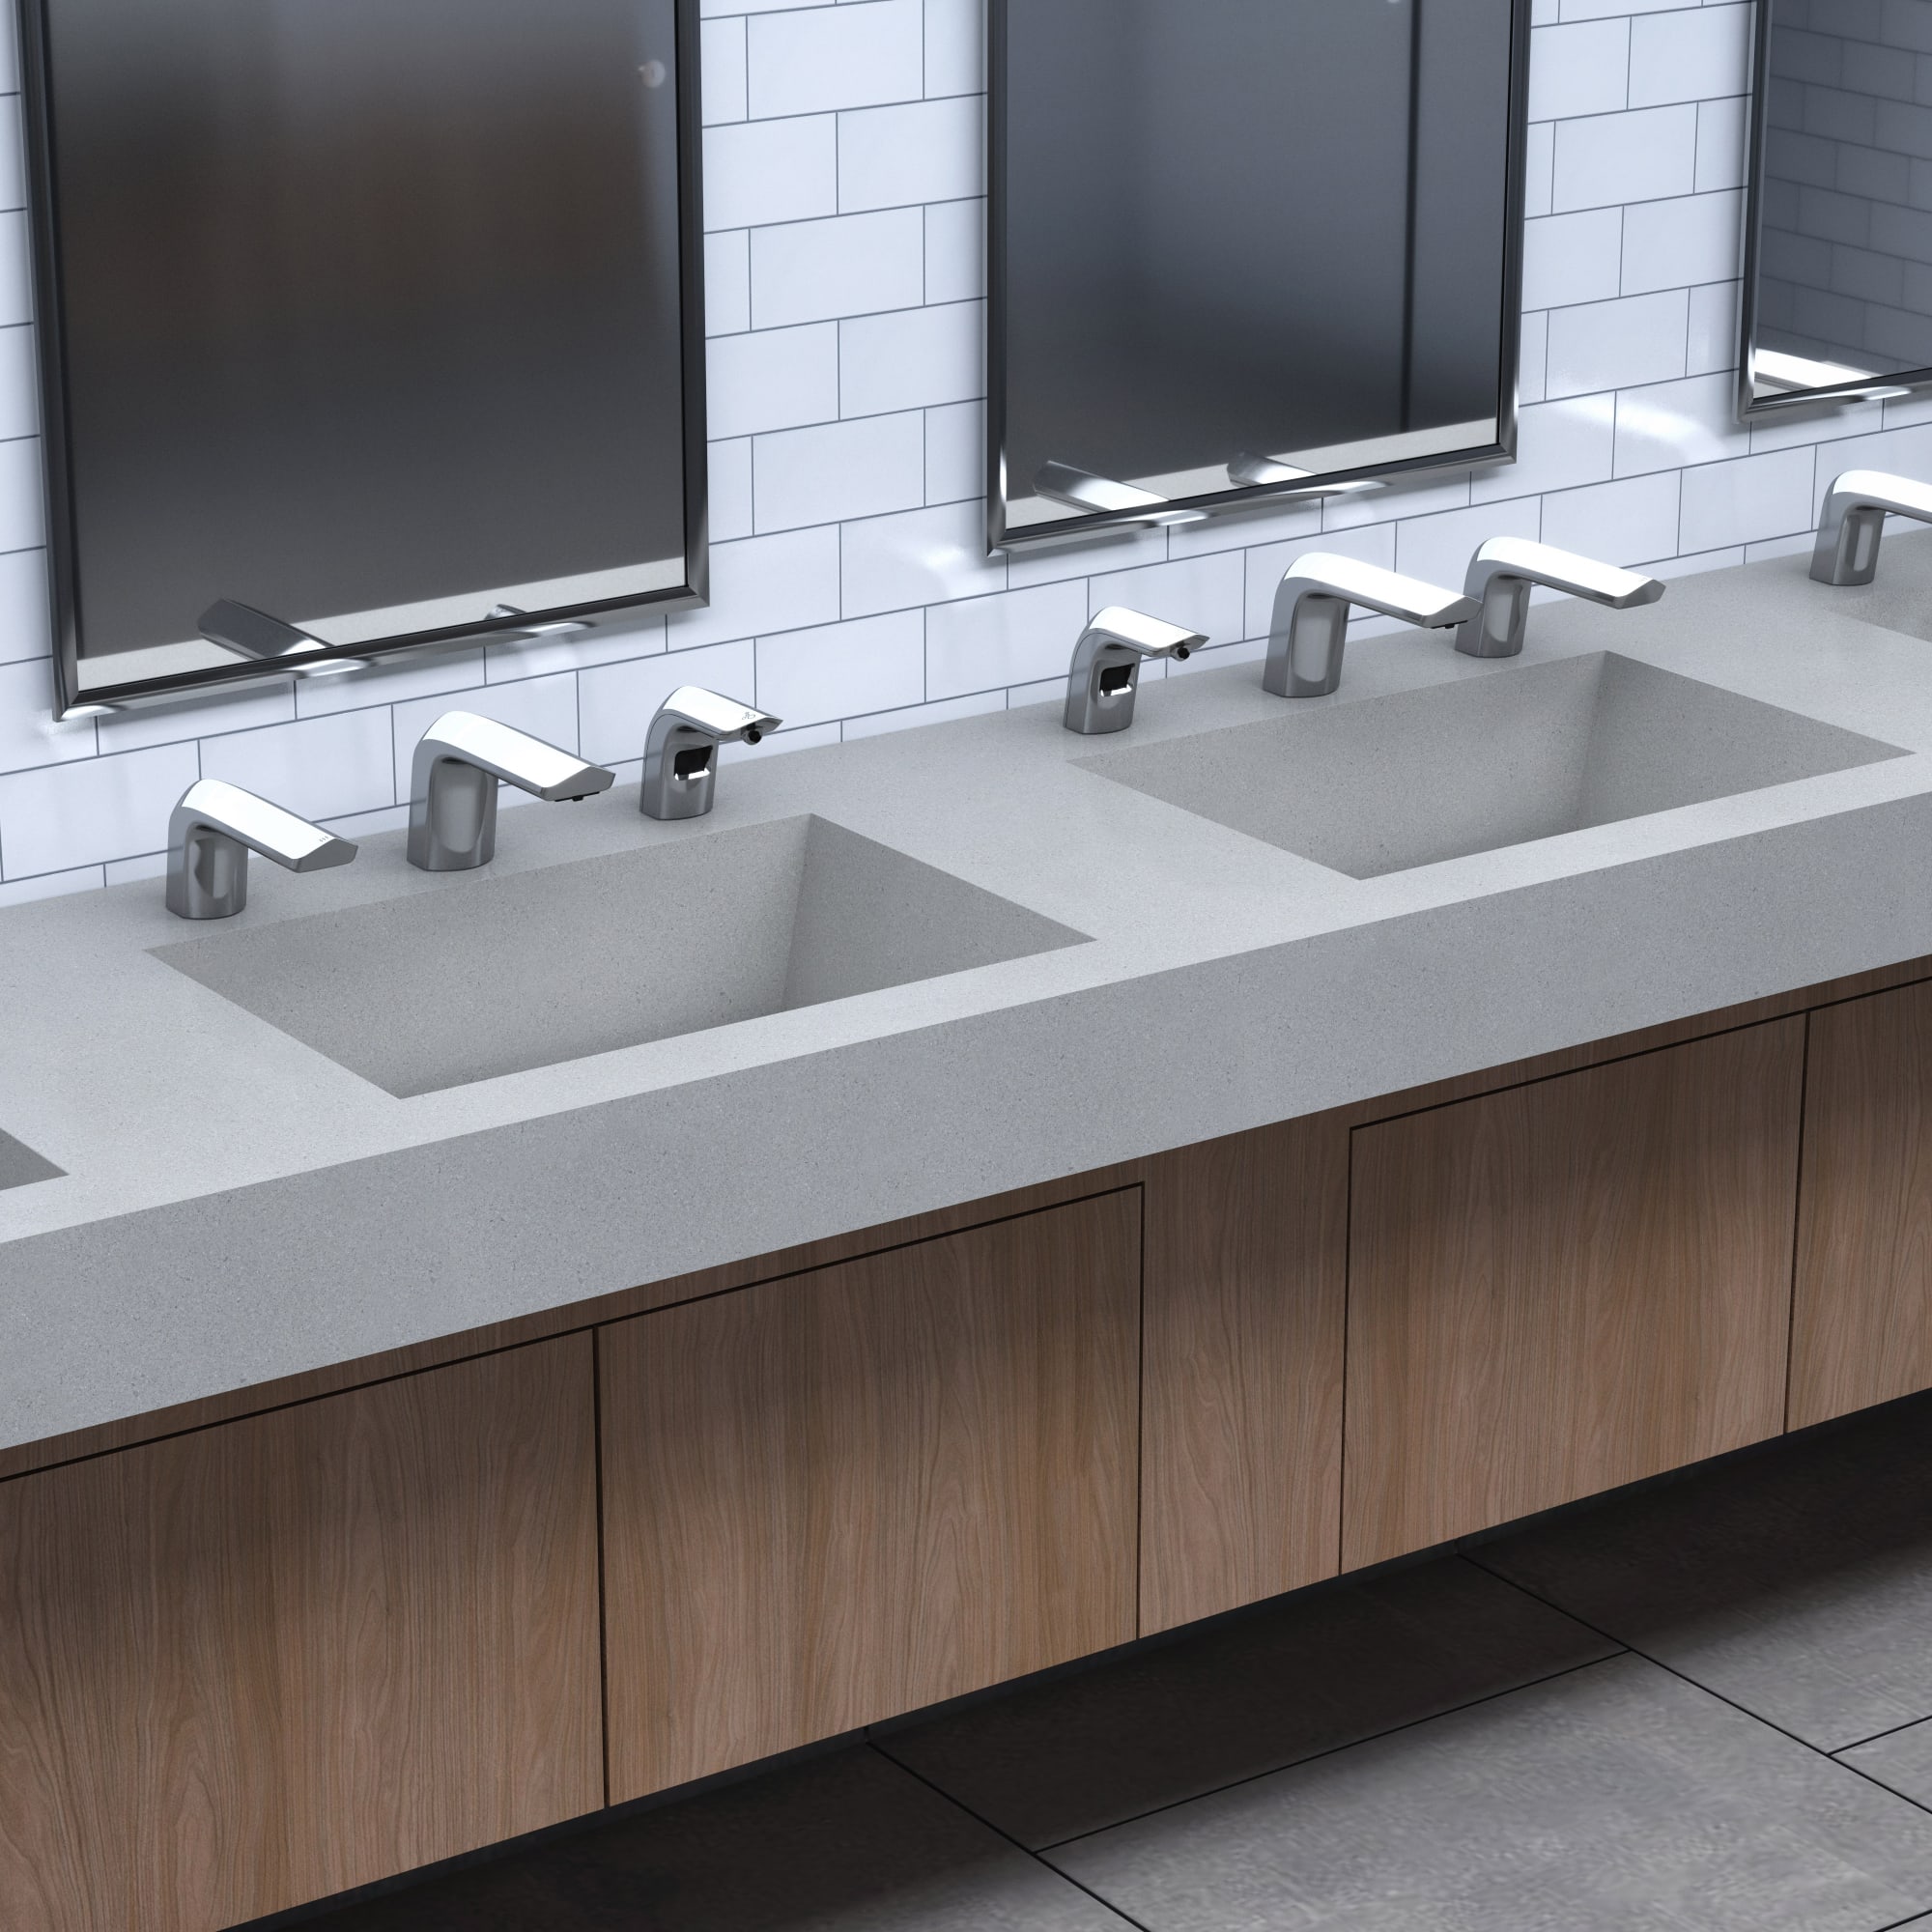 5 Steps to Creating a Sustainable Commercial Bathroom - Bathroom